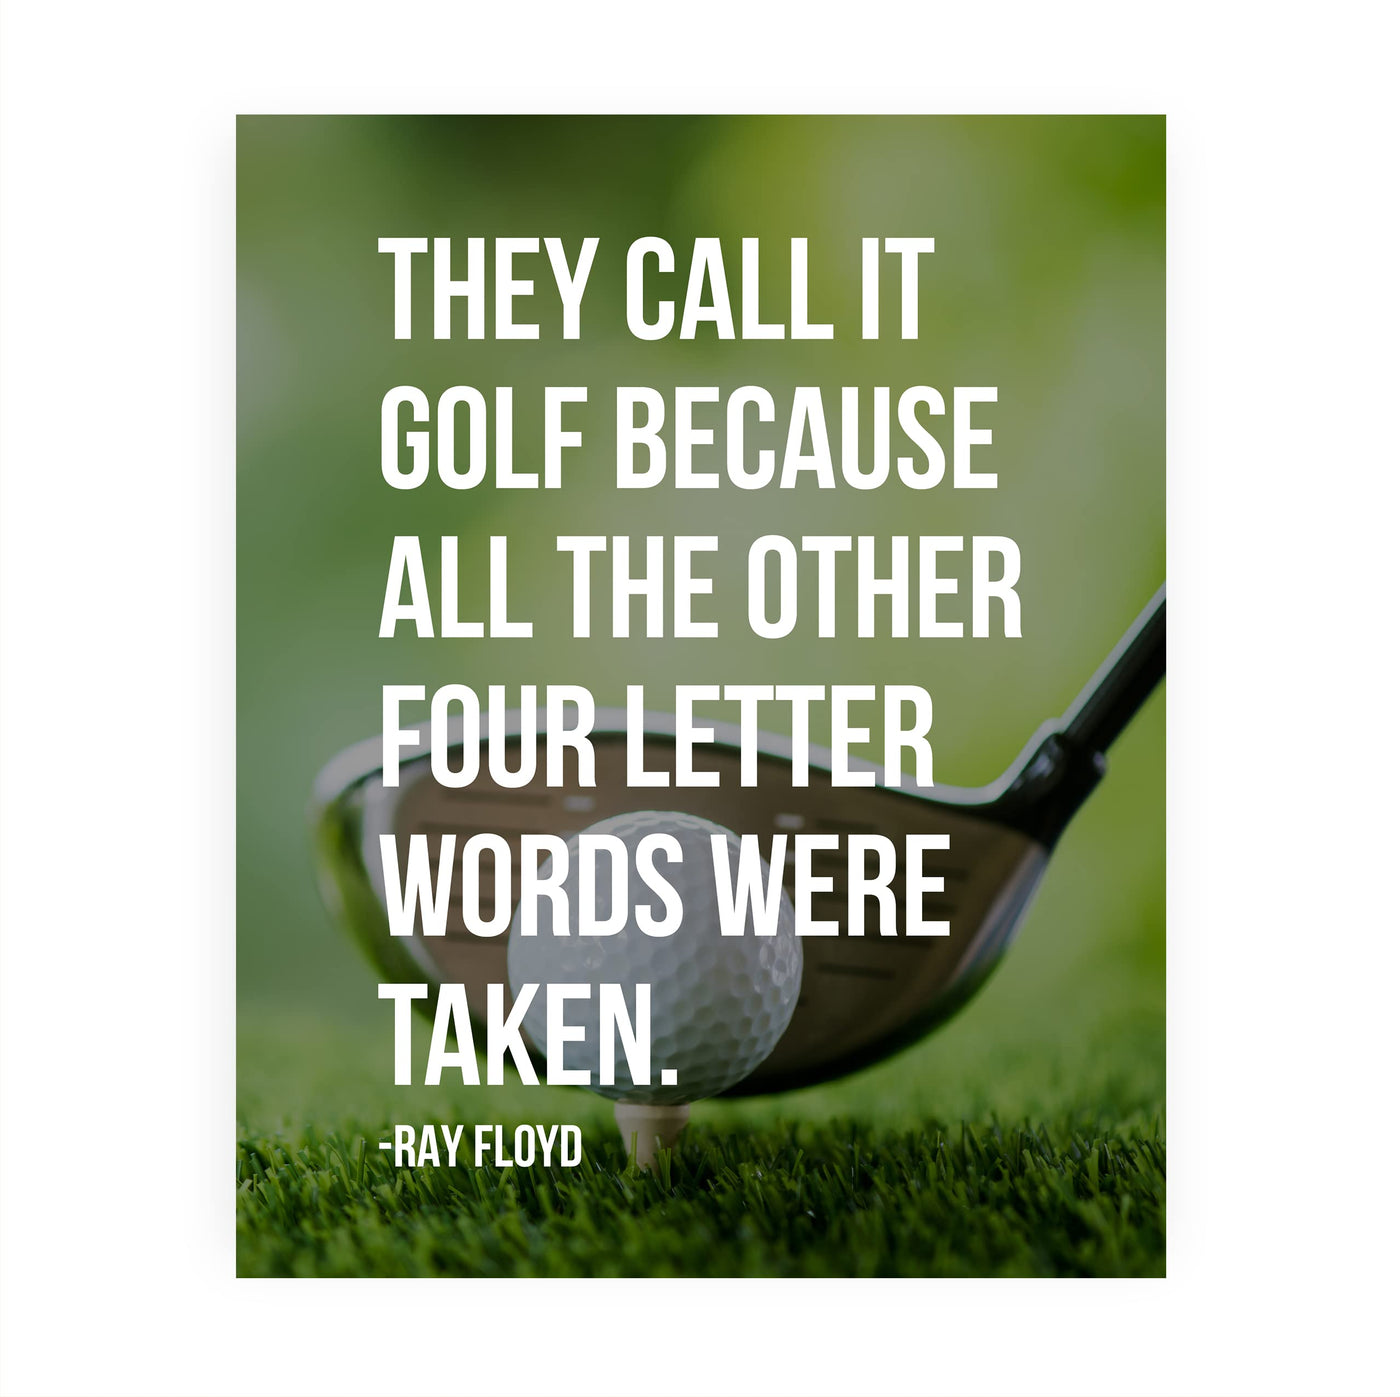 They Call It Golf Because Other Four Letter Words Taken-Funny Golf Wall Sign -8 x 10"- Retro Golf Quotes Decor Print -Ready to Frame. Home-Office-Country Club Decor. Great for Man Cave & 19th Hole!